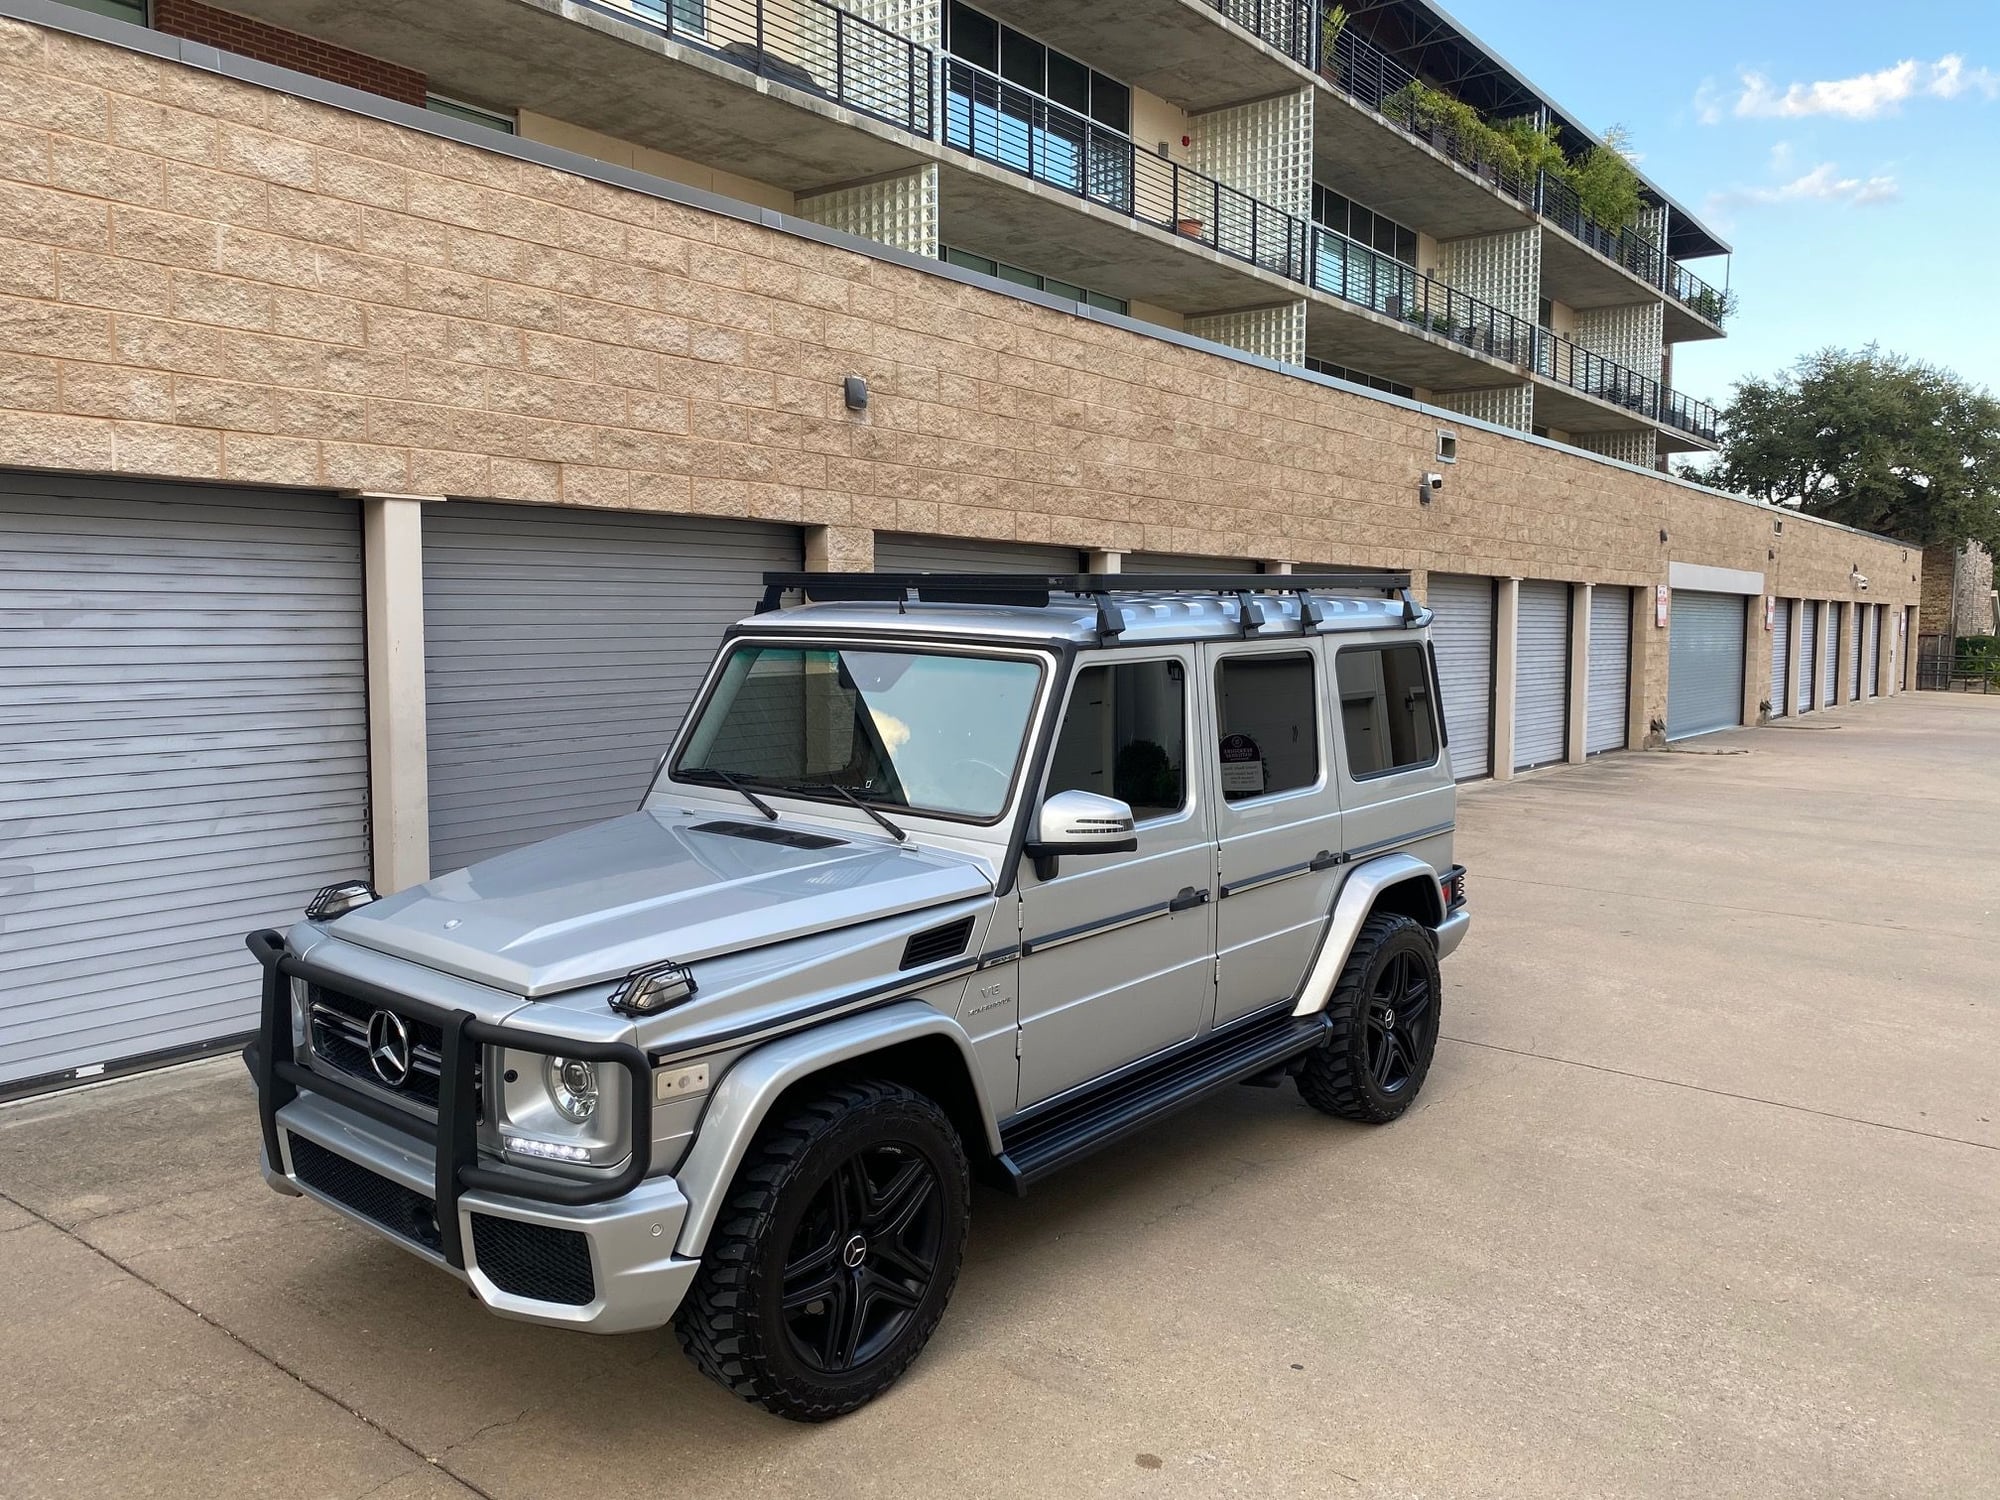 2006 Mercedes-Benz G55 AMG - G55 AMG with G63 facelift and Outlander Kit - Used - VIN wdcyr71e76x166991 - 120,000 Miles - 8 cyl - AWD - Automatic - Wagon - Silver - Dallas, TX 75204, United States